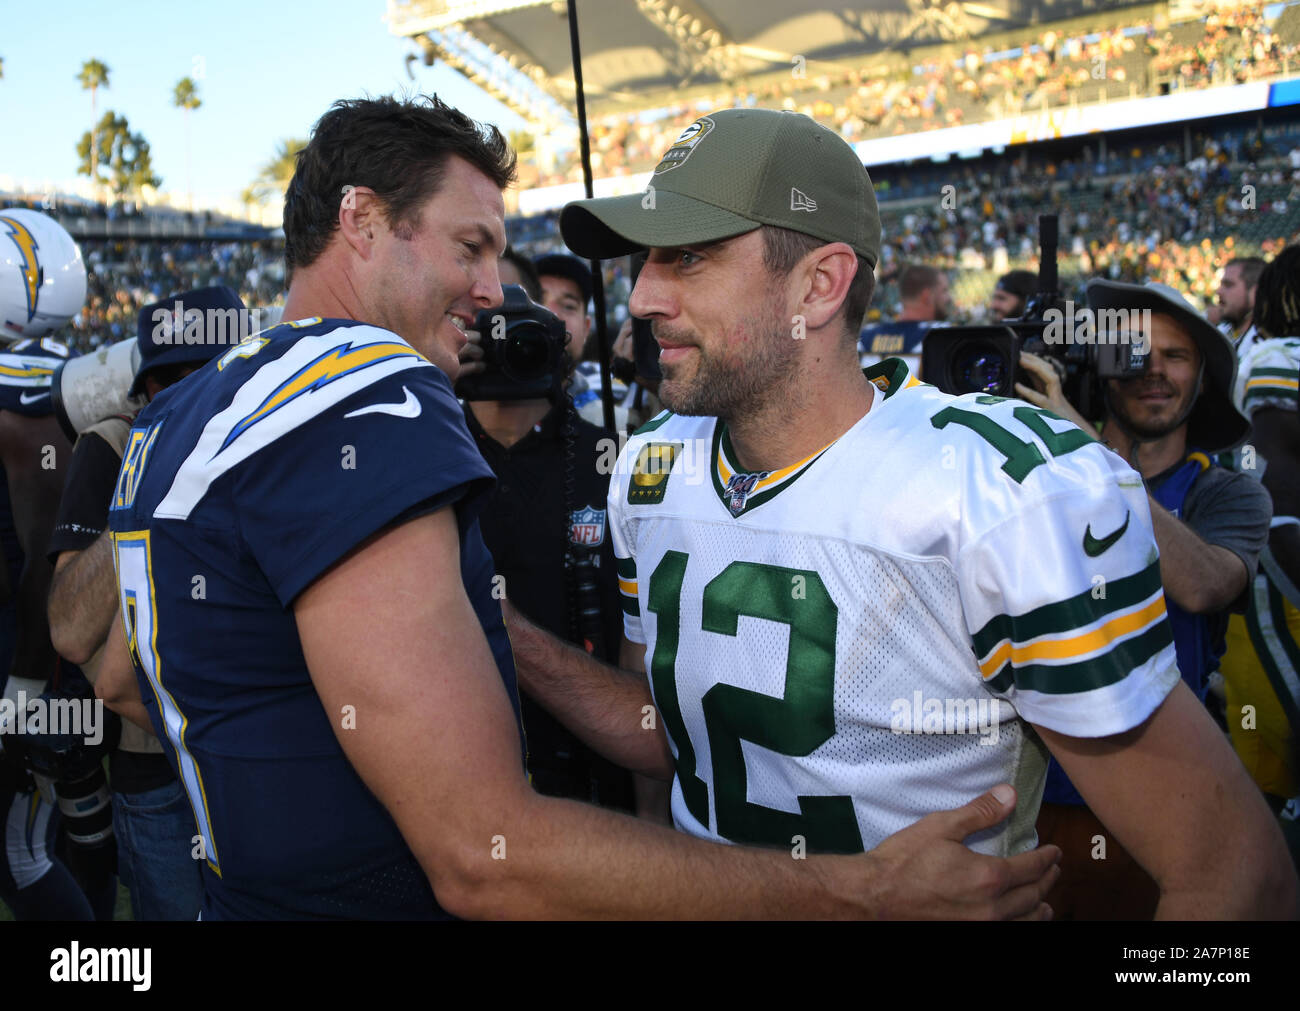 Carson, United States. 03rd Nov, 2019. Los Angeles Chargers' quarterback Philip Rivers and Green Bay Packers quarterback Aaron Rodgers embrace postgame at Dignity Health Sports Park in Carson, California on November 3, 2019. The Chargers beat the Packers 26-11. Photo by Jon SooHoo/UPI Credit: UPI/Alamy Live News Stock Photo